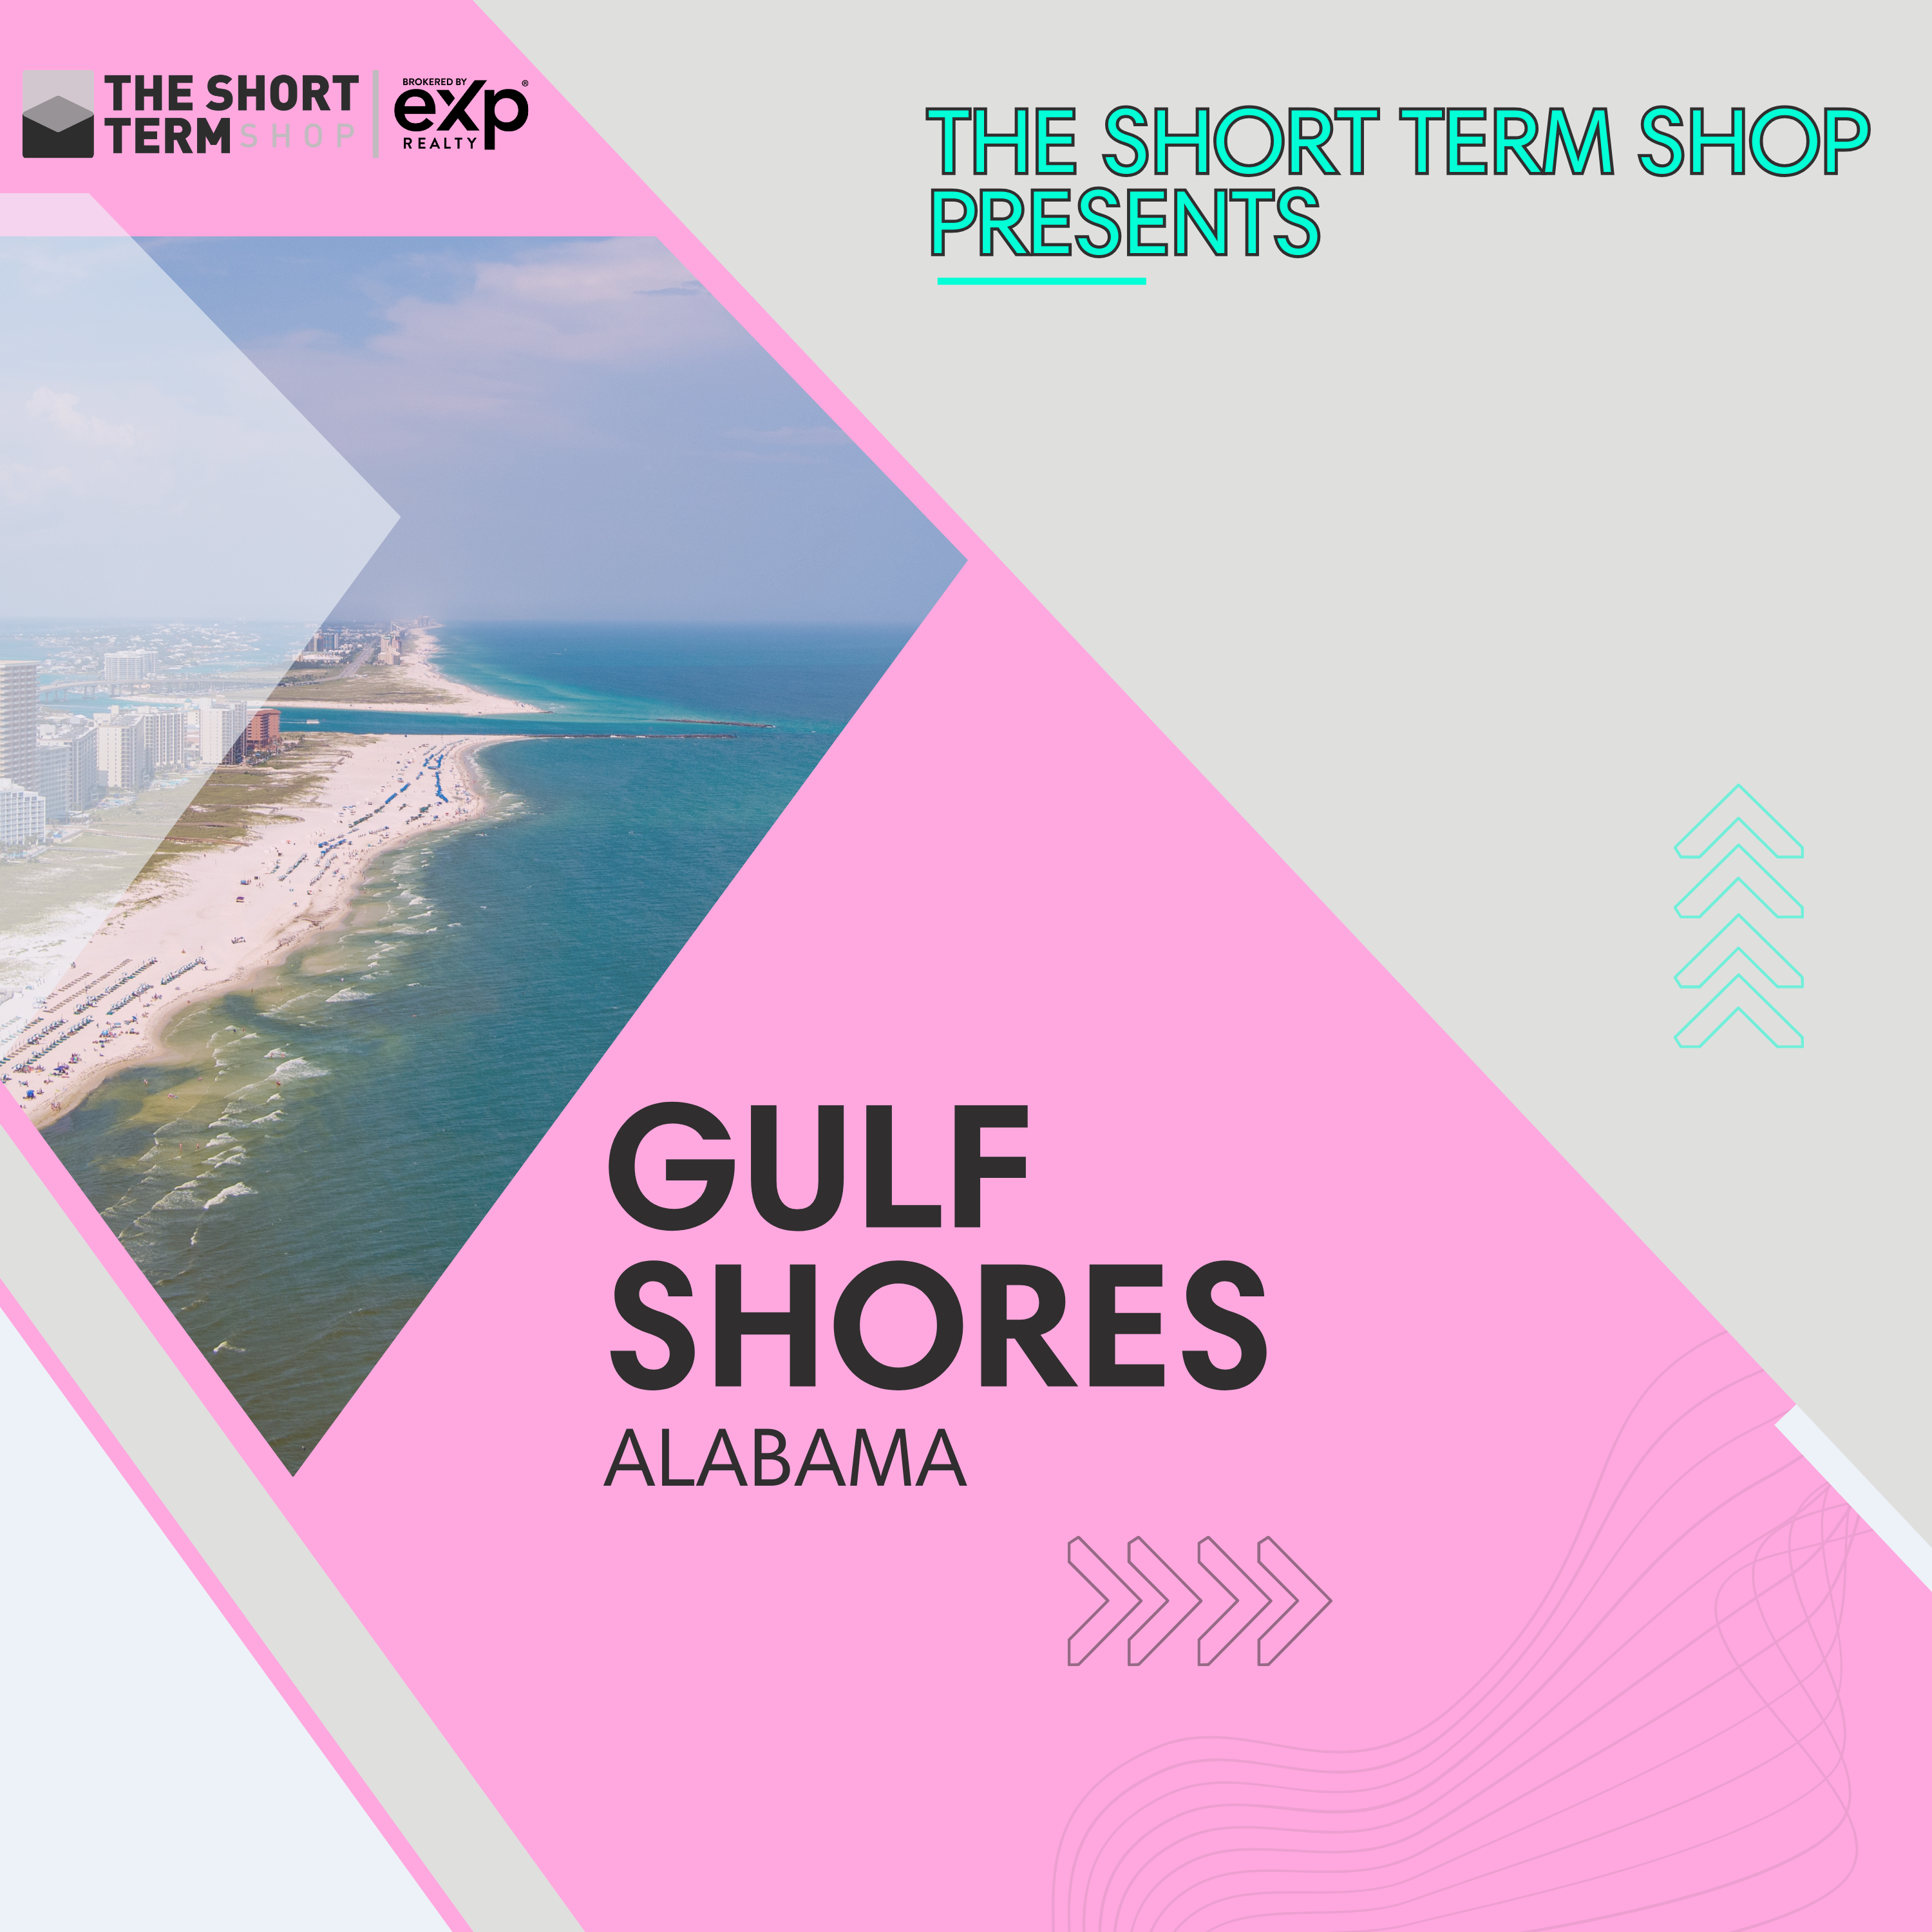 The Real Estate Contract Process When Investing In Short Term Rentals In Gulf Shores, Alabama